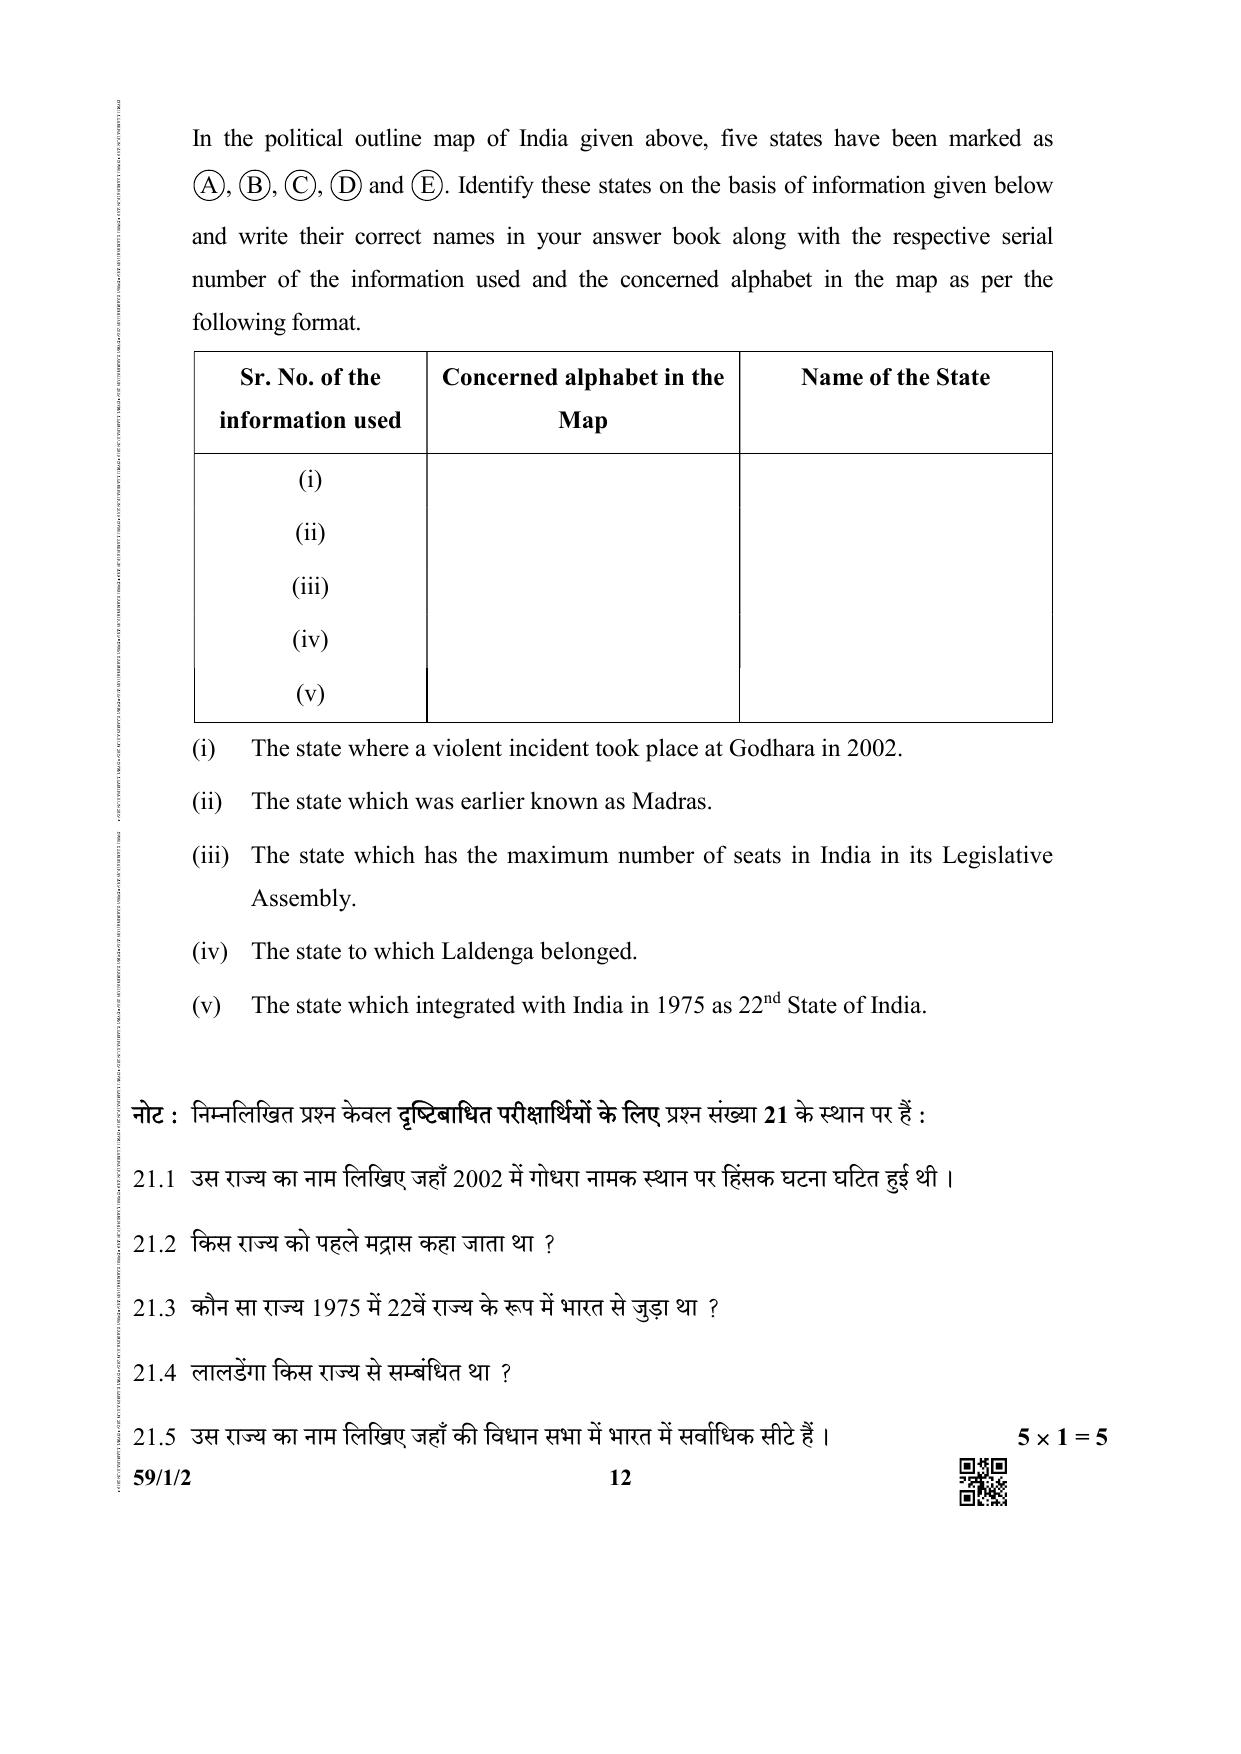 CBSE Class 12 59-1-2 (Political Science) 2019 Question Paper - Page 12